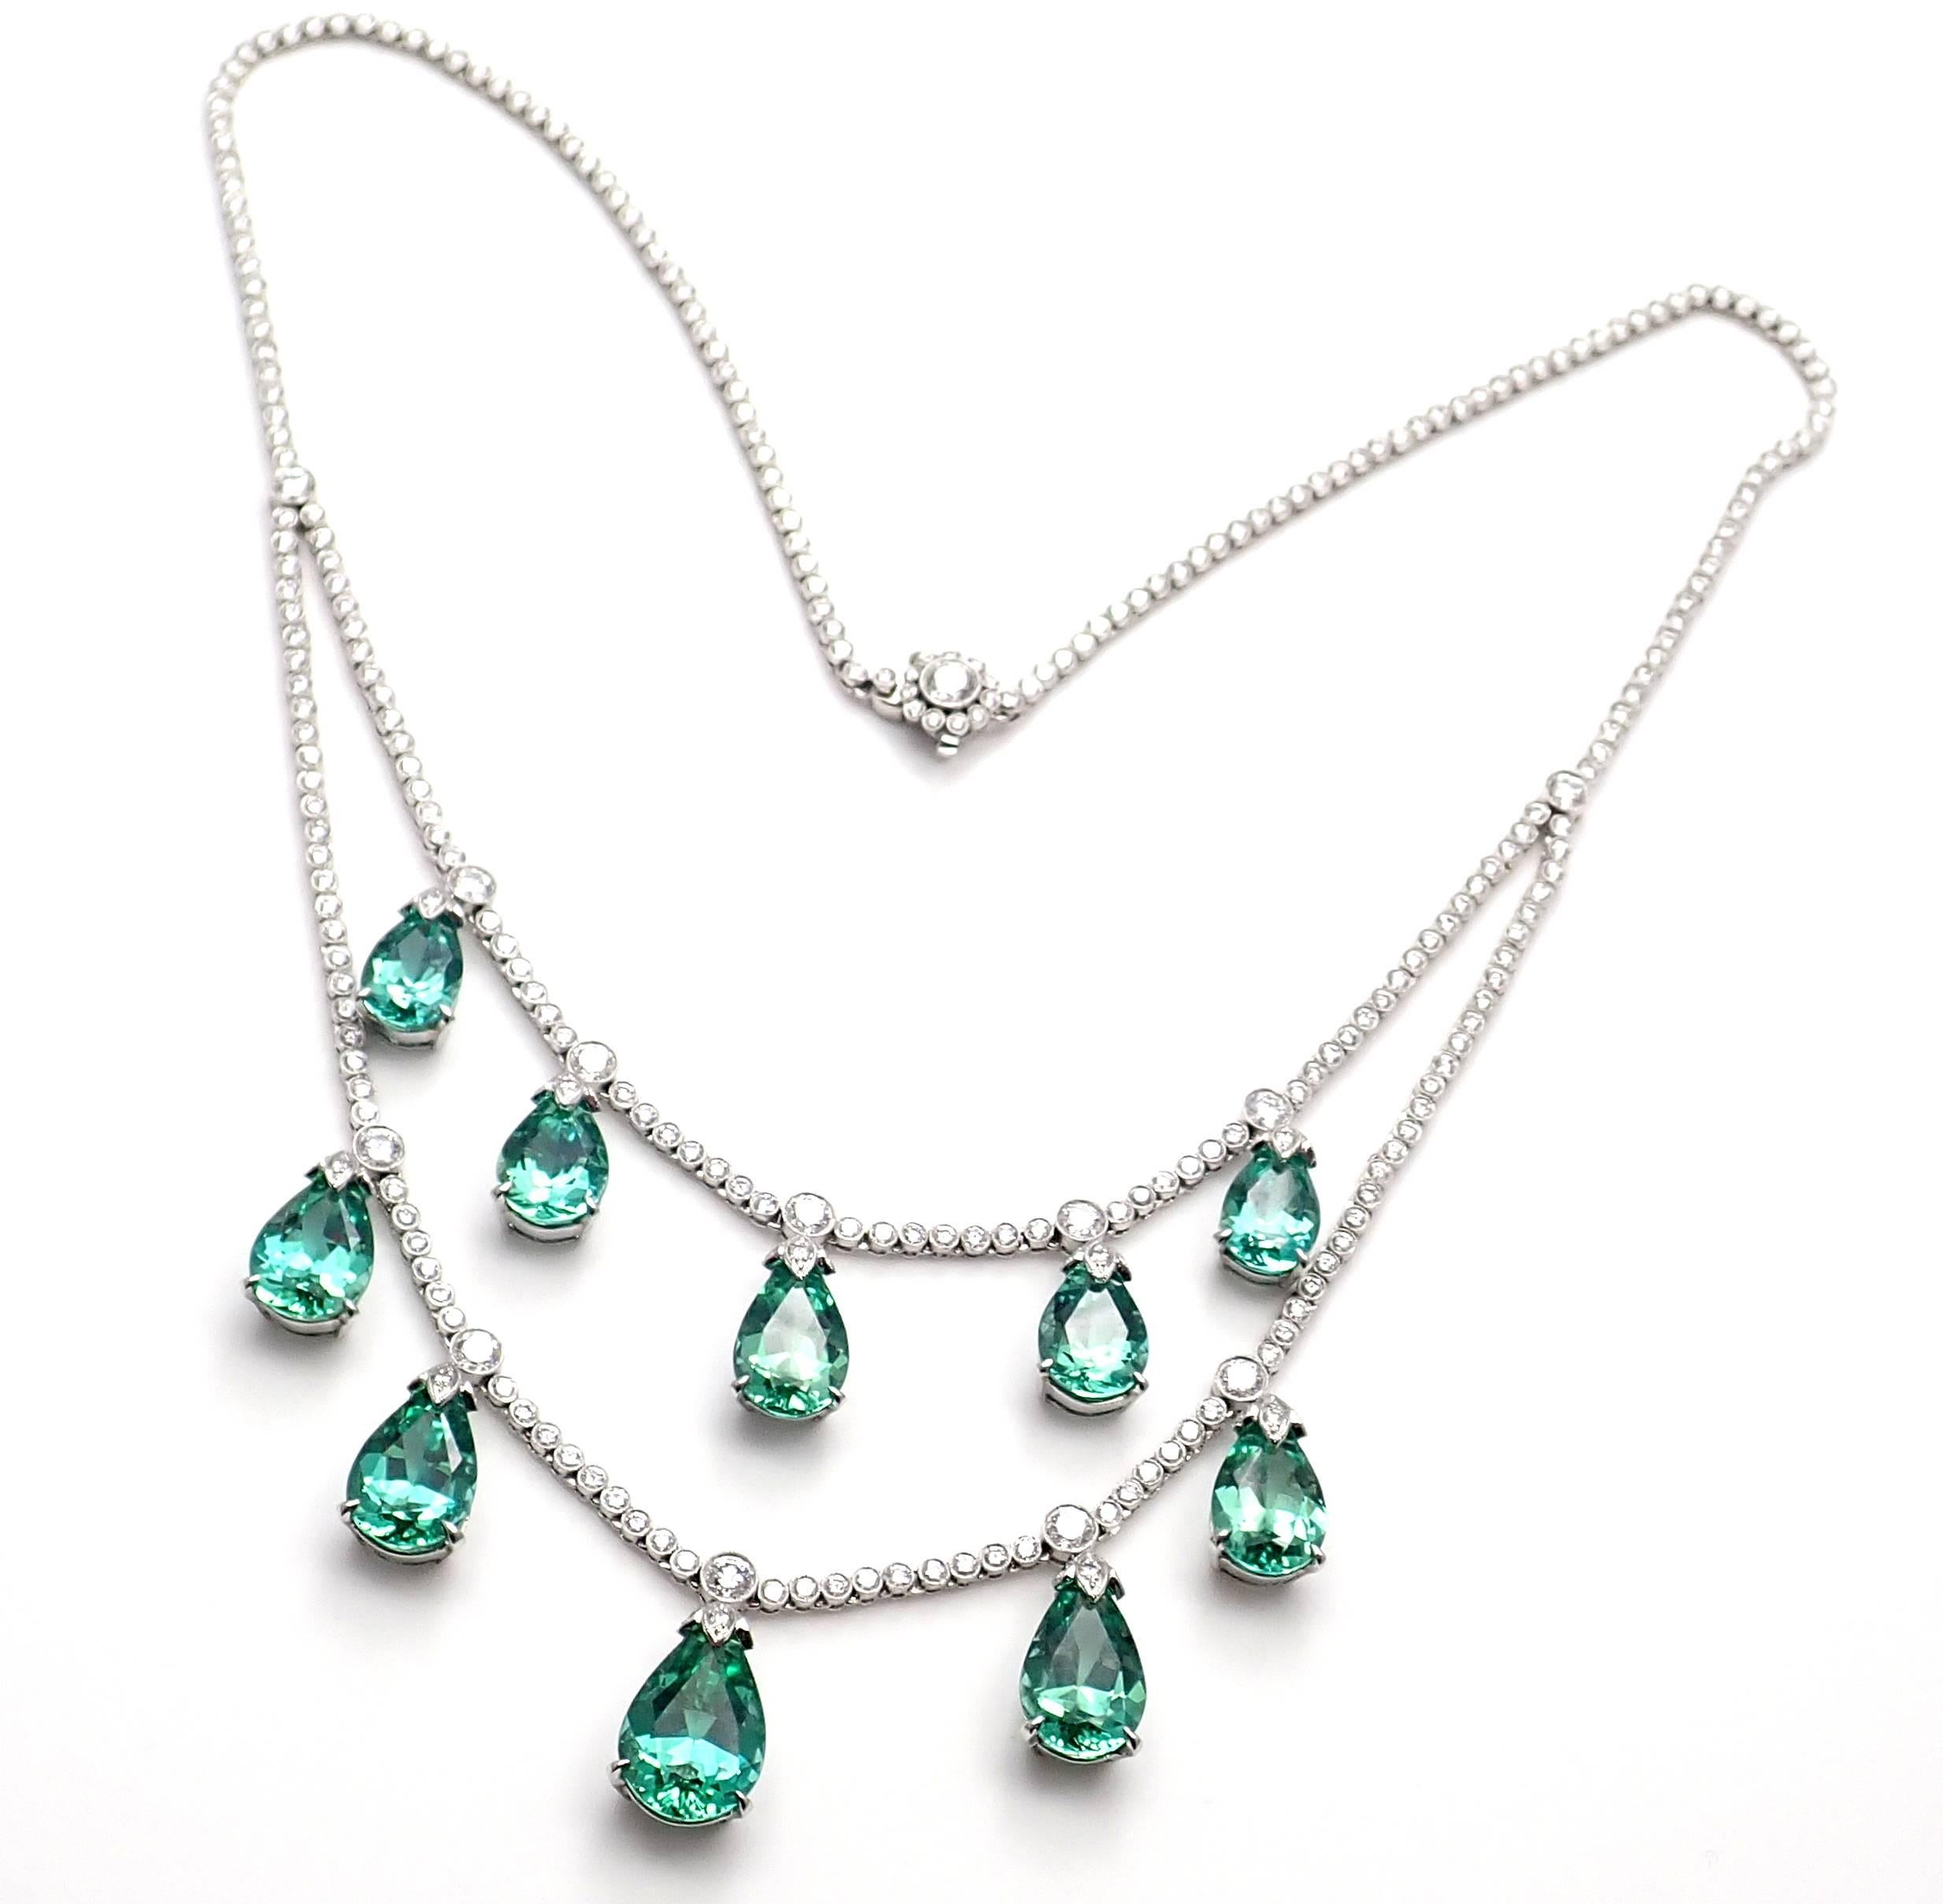 Platinum Diamond Green Gourmaline Necklace by Tiffany & Co. 
With 320 round brilliant cut diamonds G color VVS clarity total weight approx. 5.25ct
10 pear shape green tourmalines total weight approx. 22.46ct
This necklace comes with Tiffany & Co